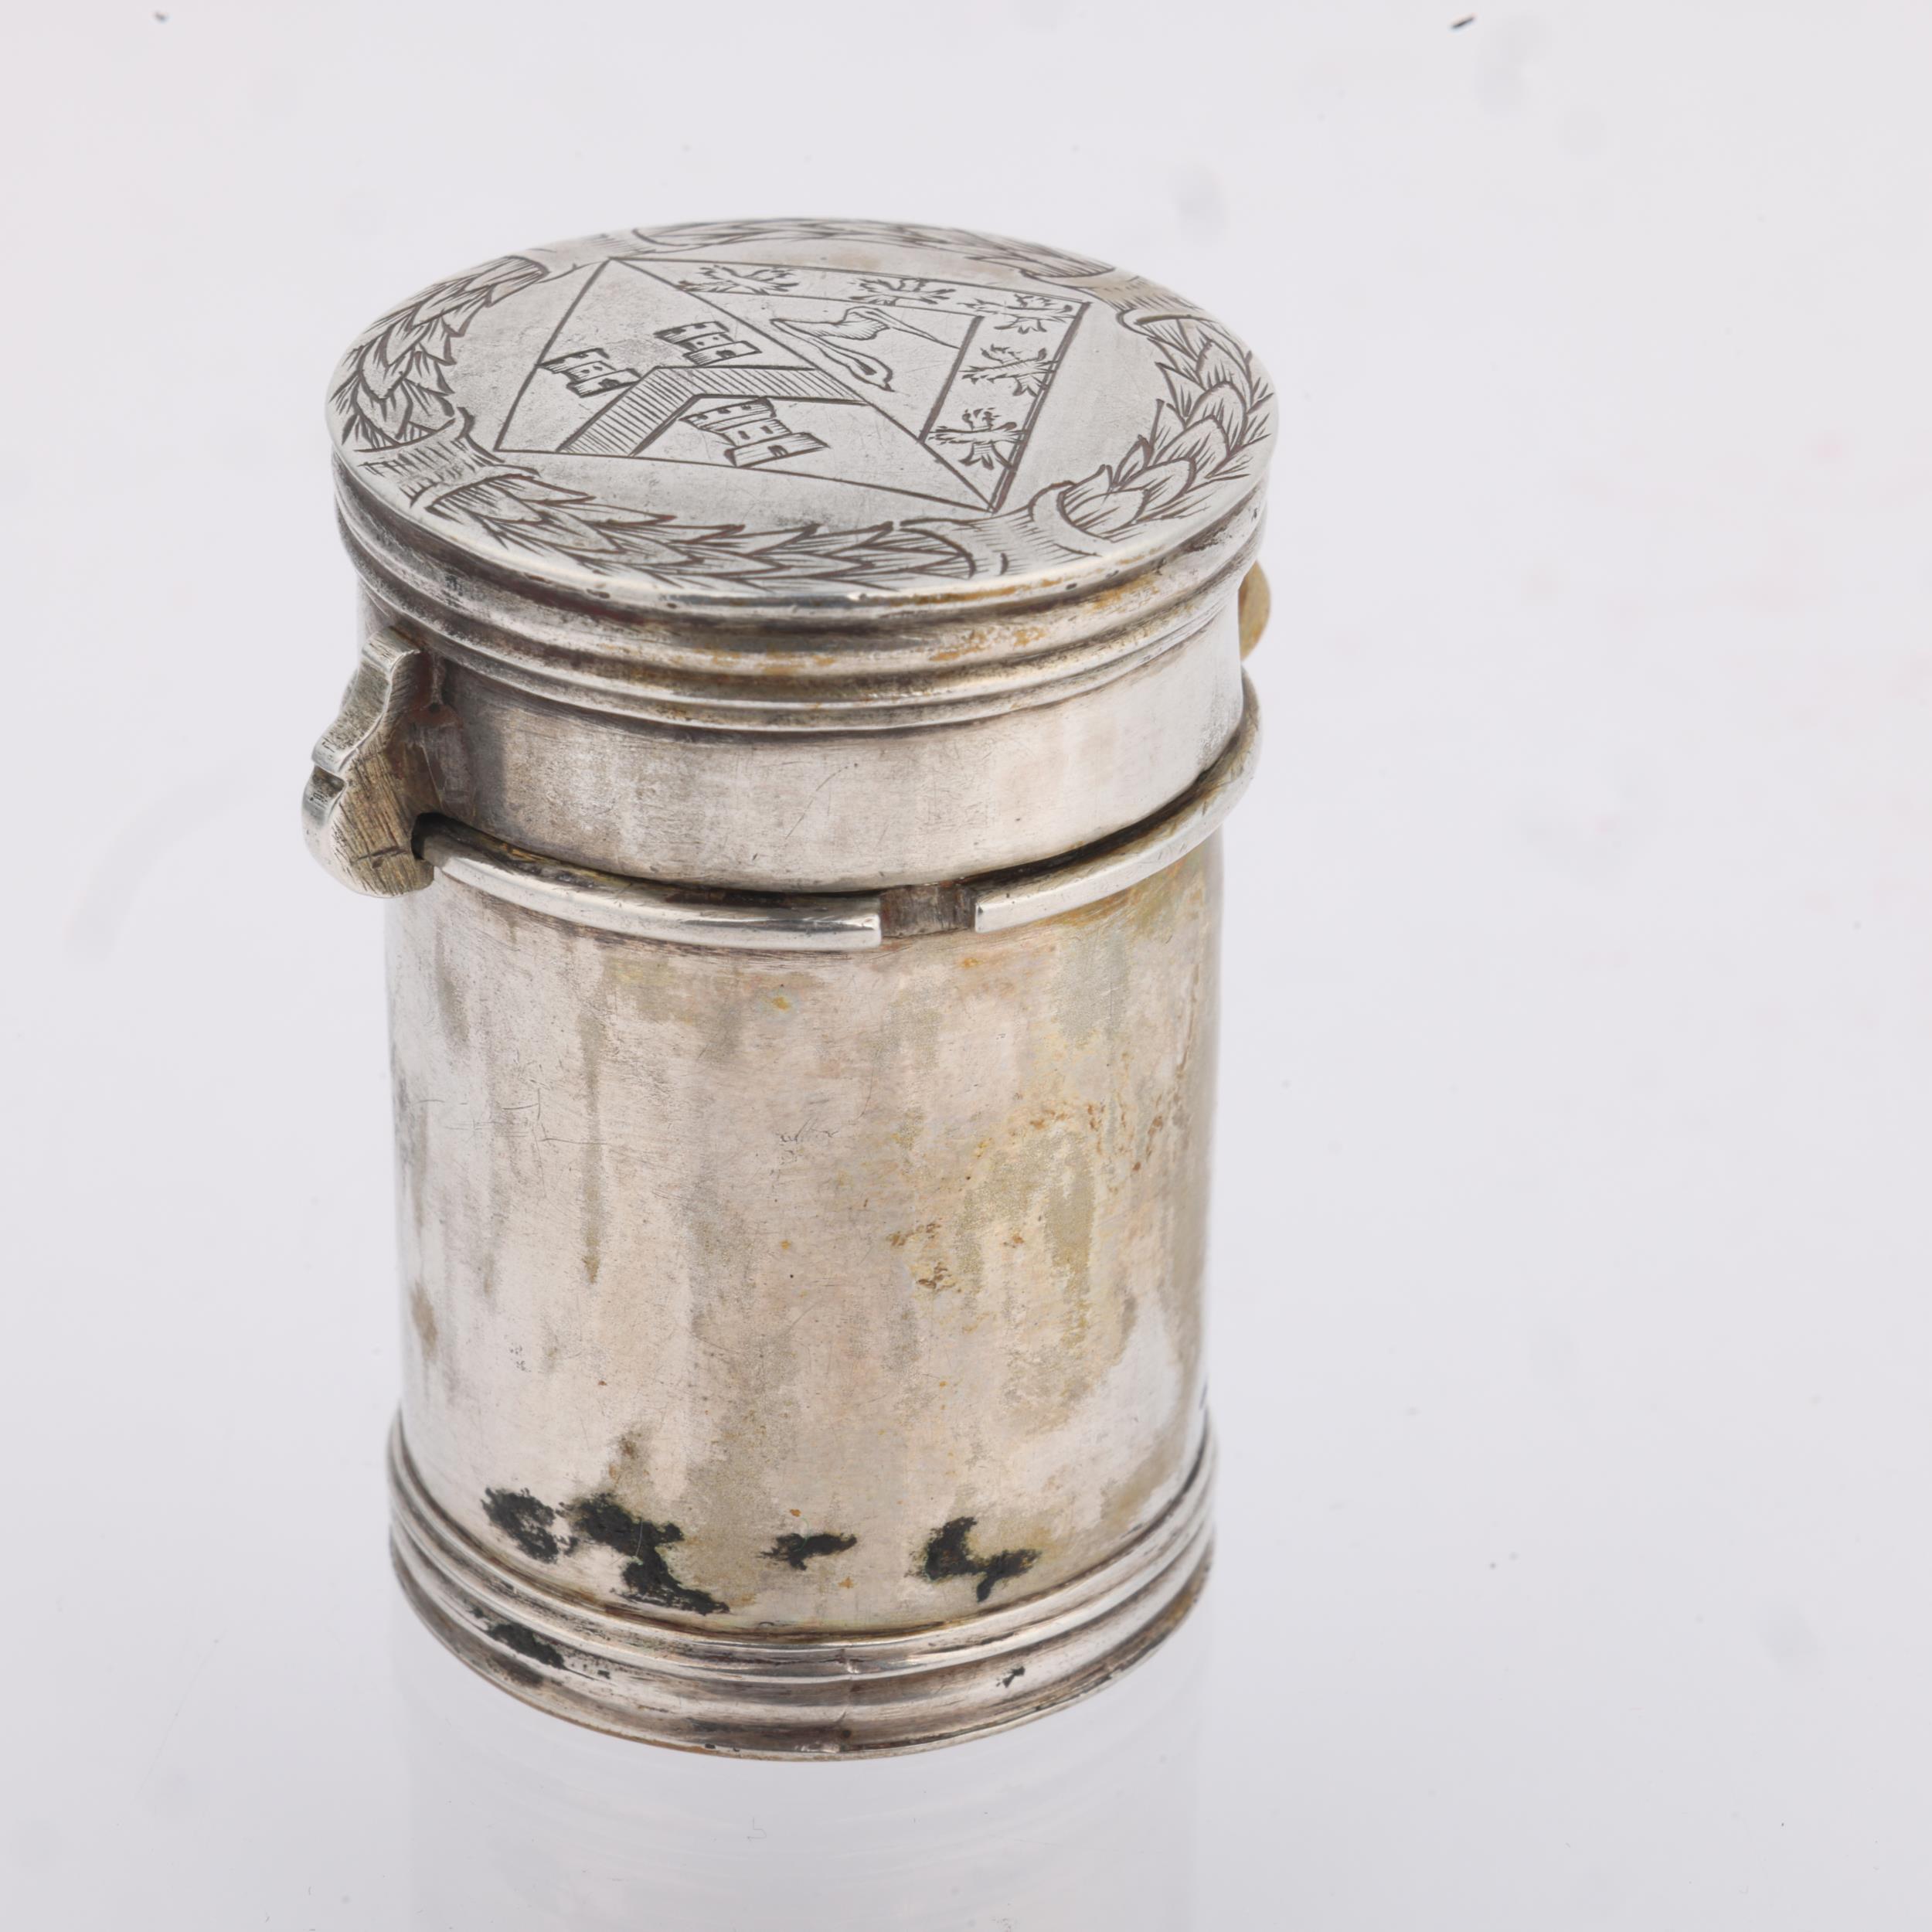 A 17th century silver counter box, cylindrical form with engraved armorial crest within wreath, - Image 2 of 3